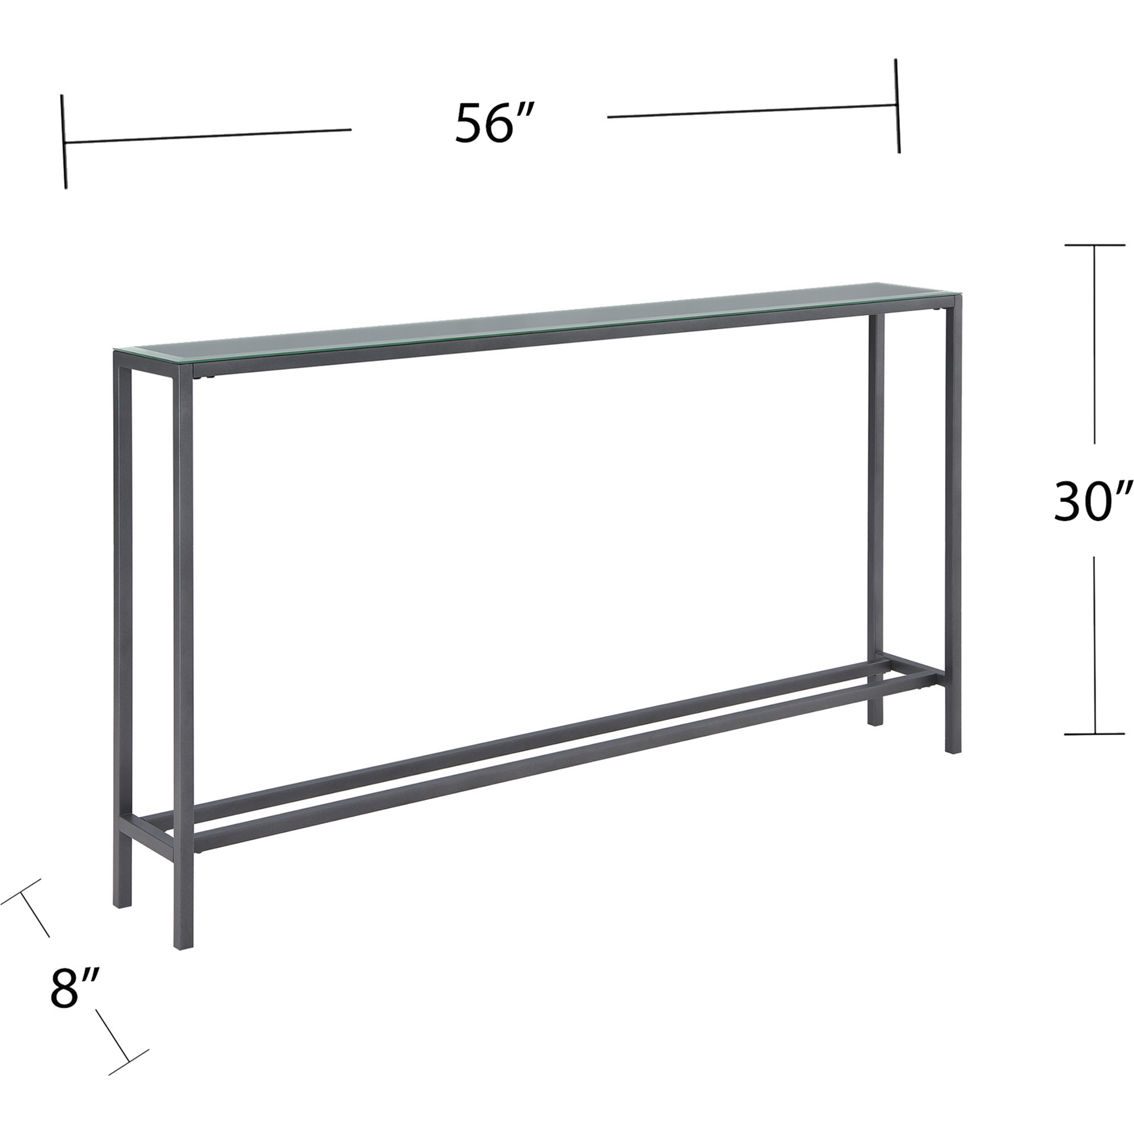 SEI Darrin Narrow Long Console Table with Mirrored Top Gunmetal Gray - Image 4 of 4